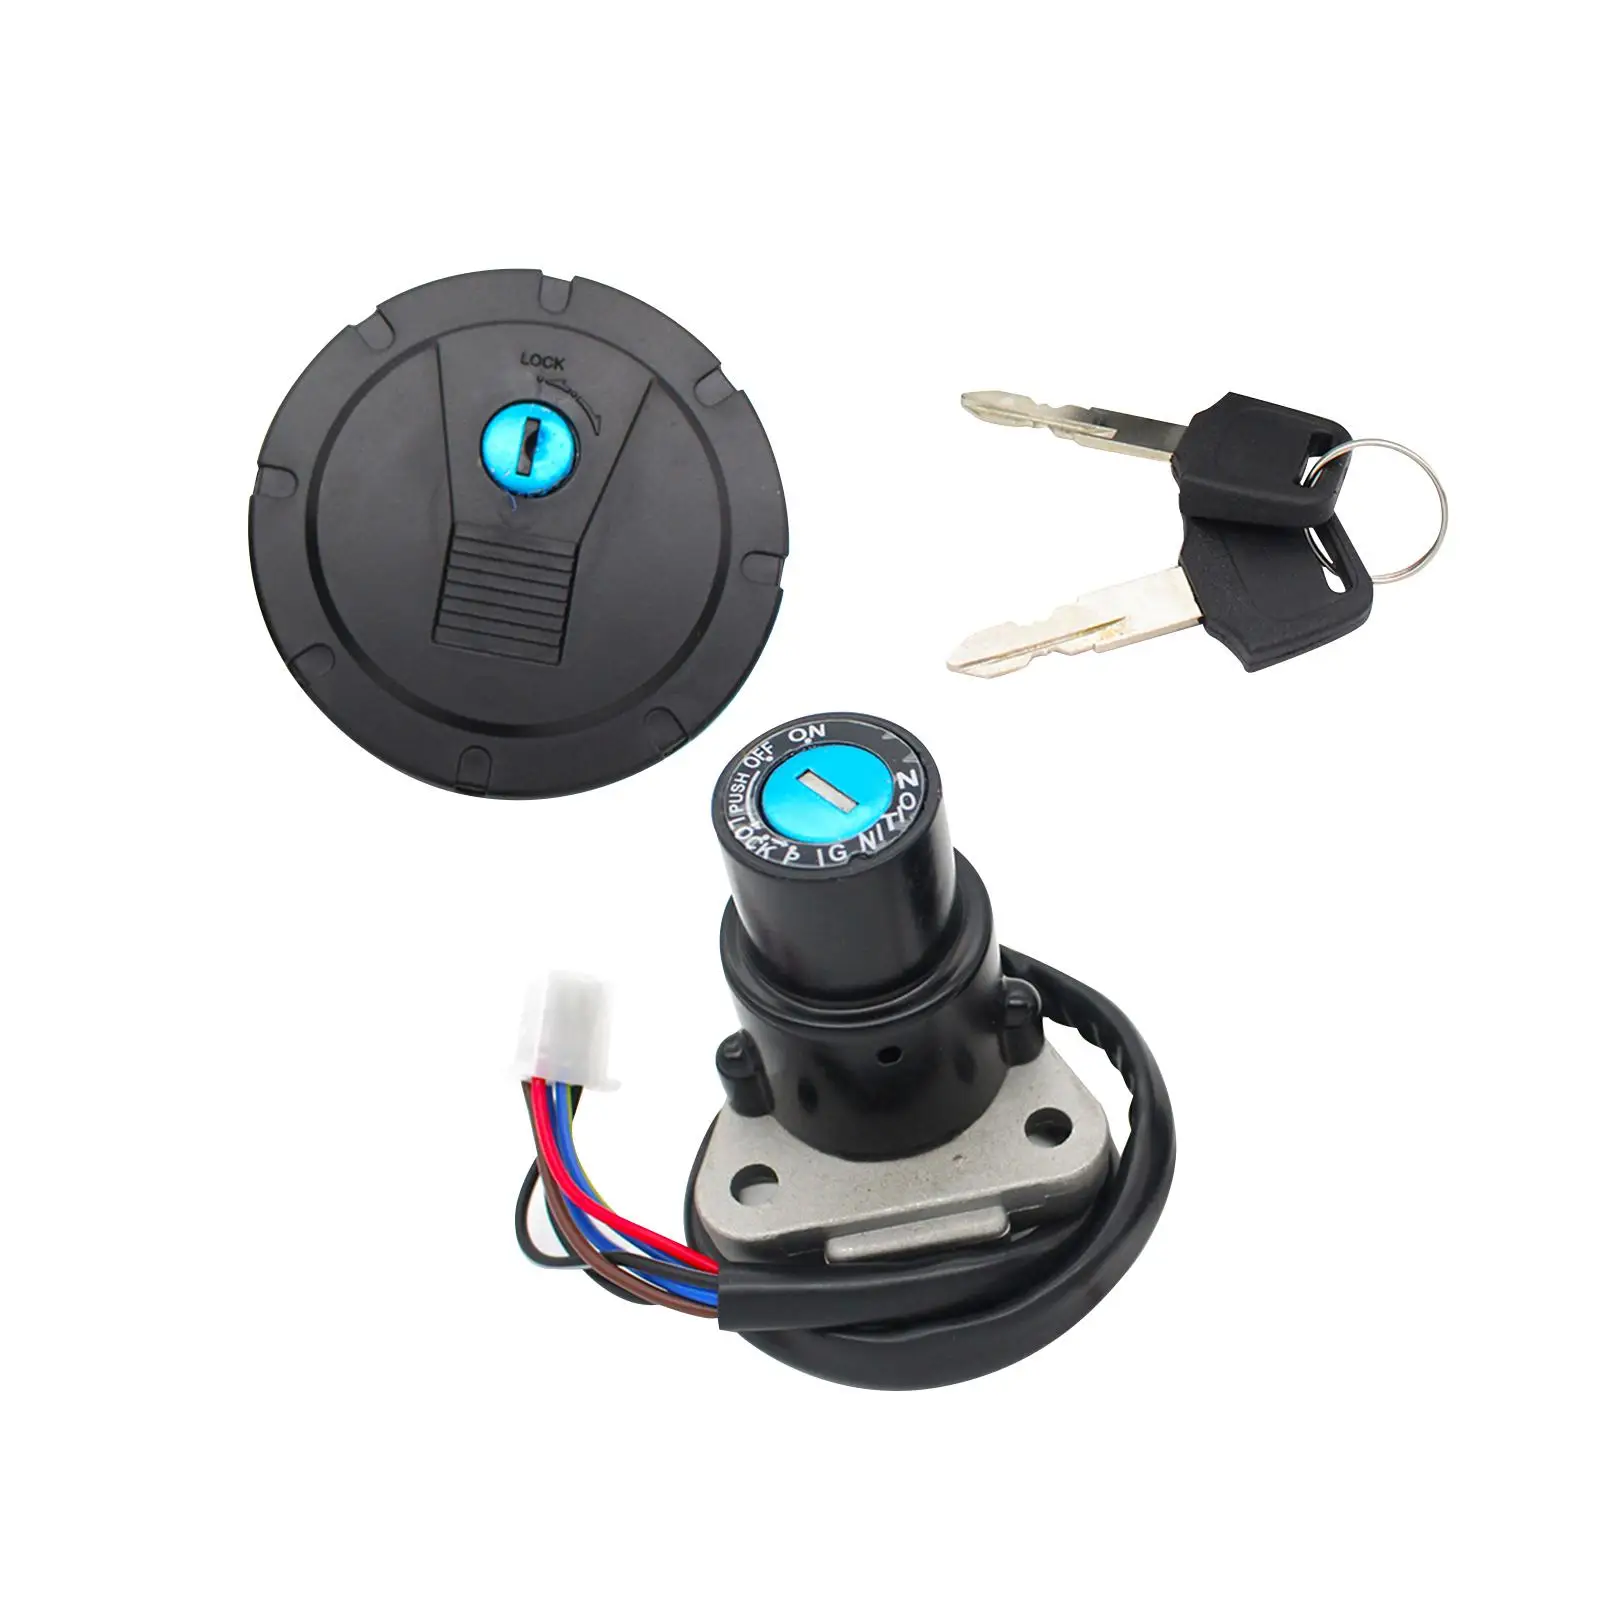 Ignition Key Switch High Performance Premium Accessories Durable Replaces with Key for Kawasaki Klr650 Klr 650 1987-2007